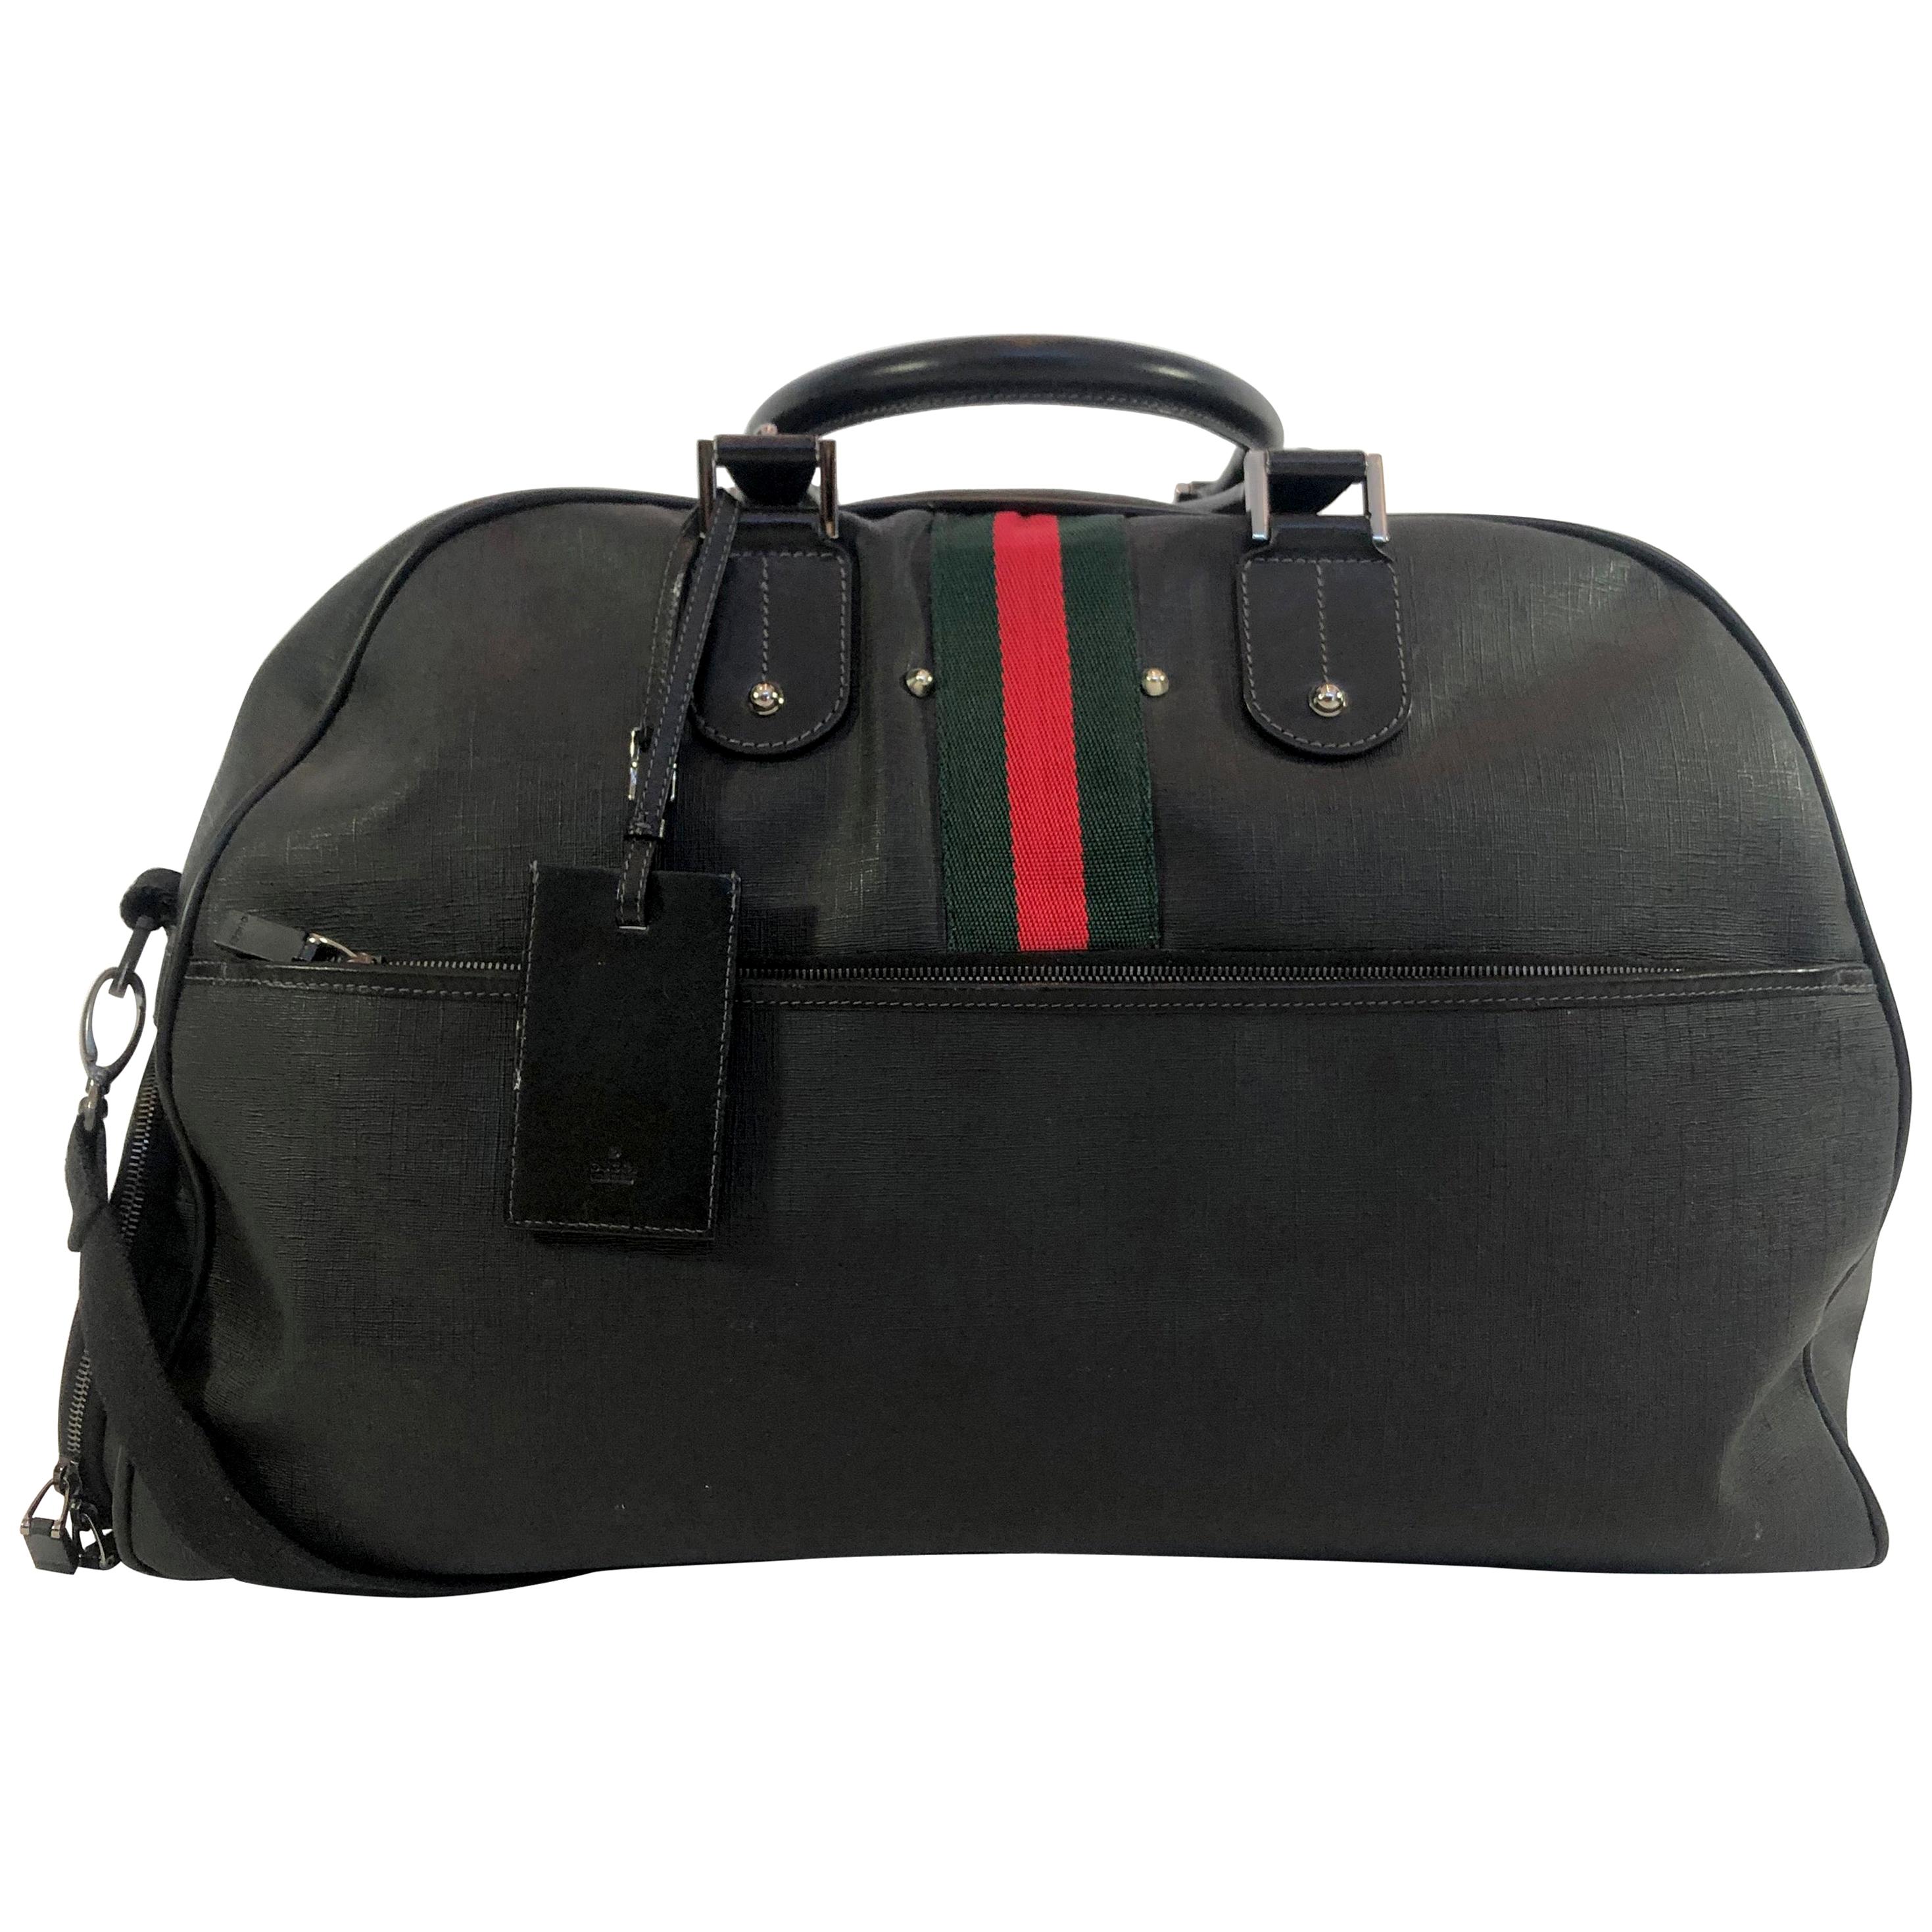 Gucci Black Leather Weekender Suitcase with Classic Green and Red Stripe 